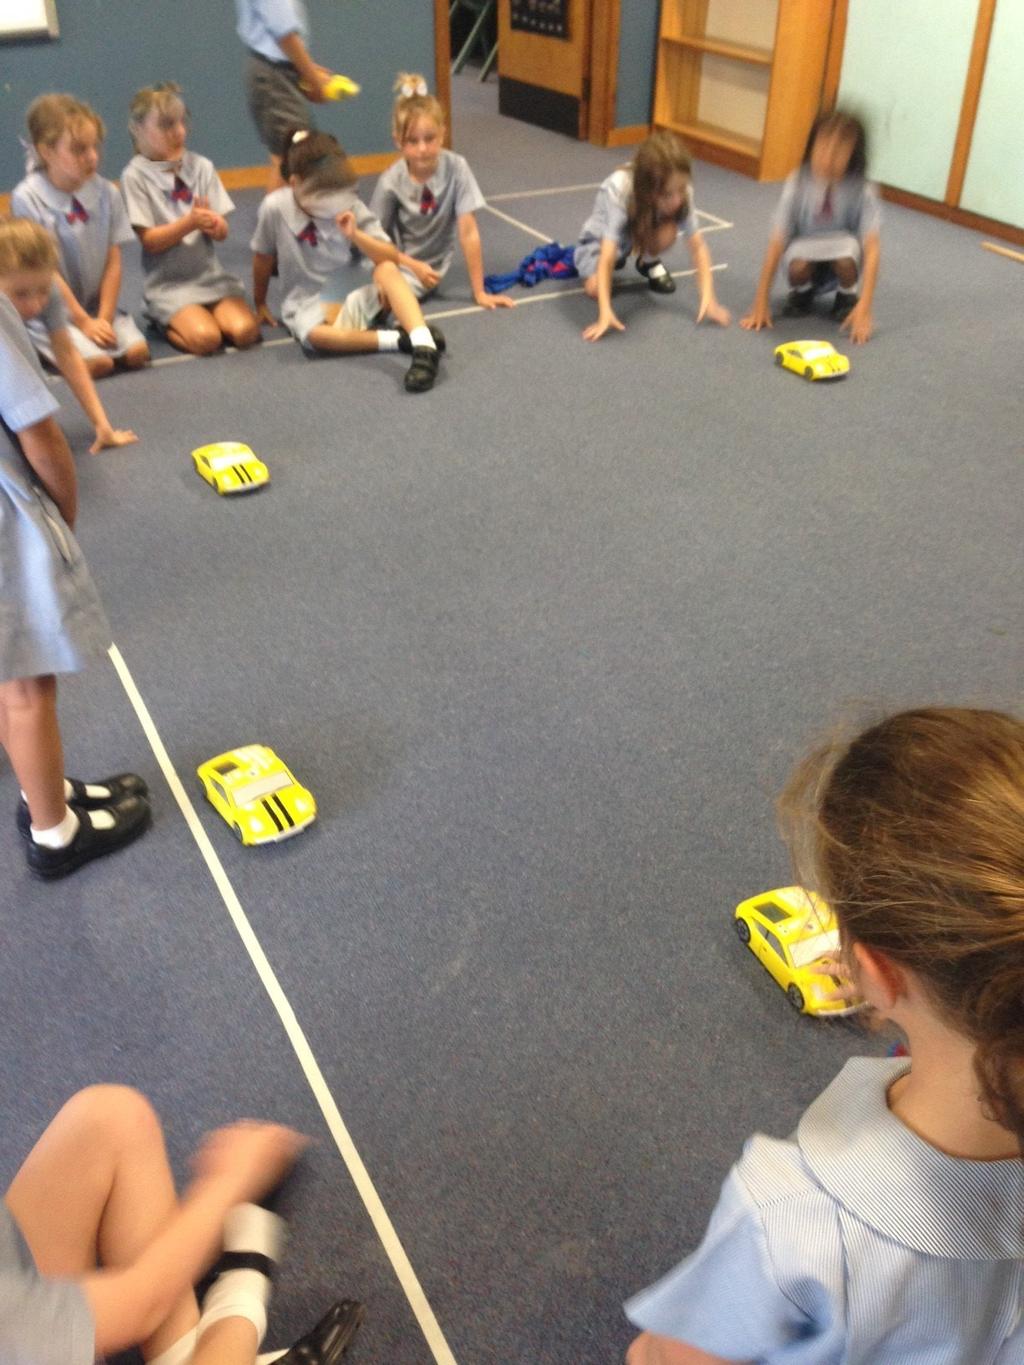 The students have had great fun following tracks and racing each other to the finish line!